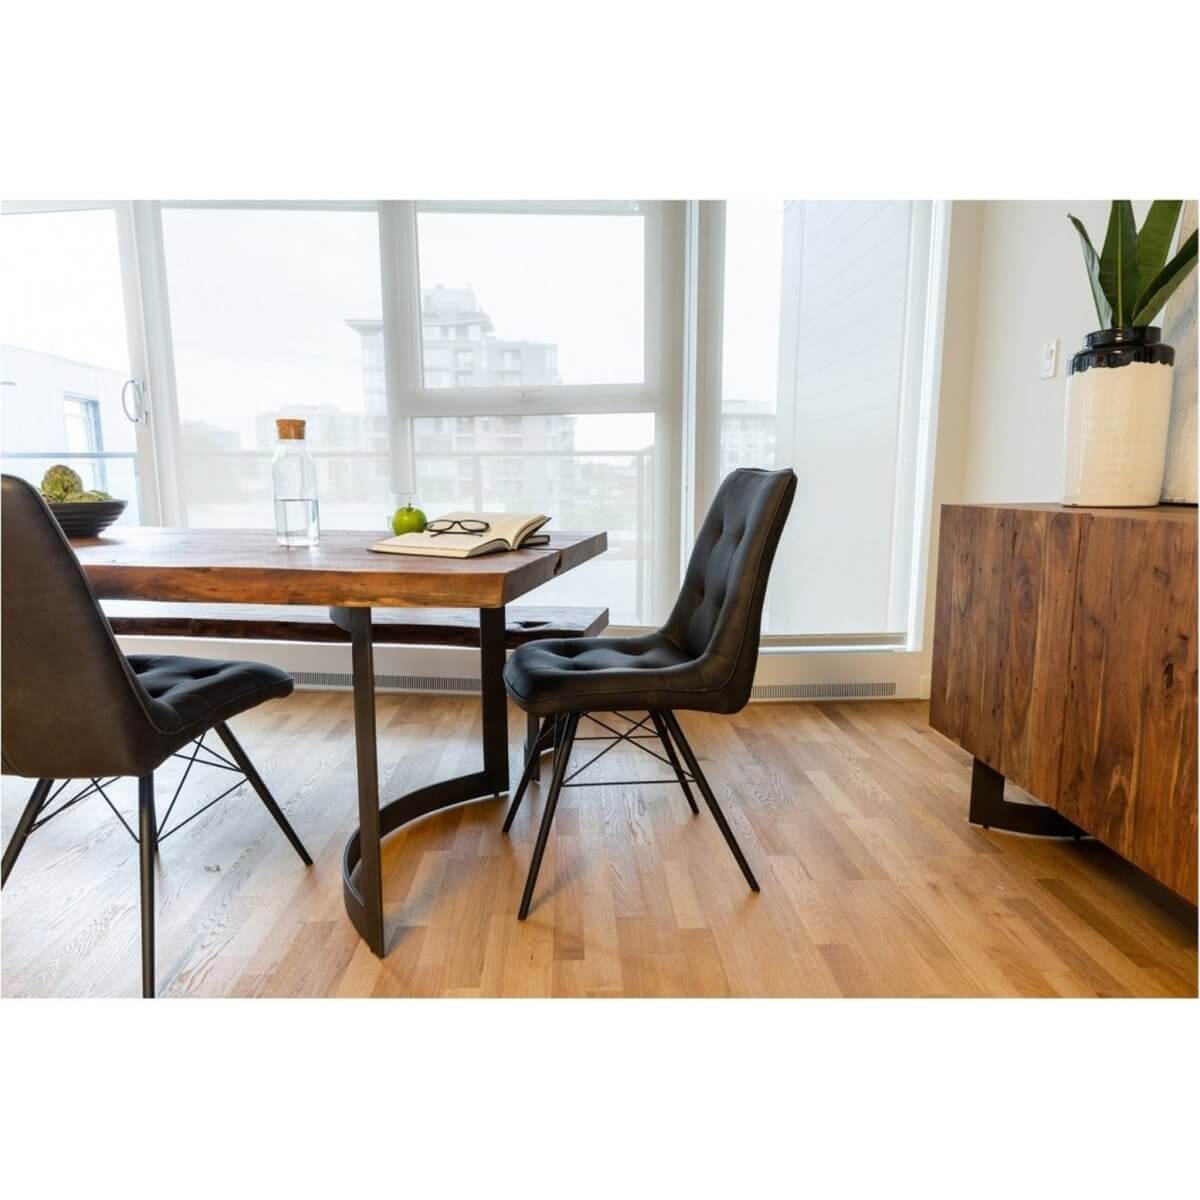 Moes Home Bent Dining Table Small - VE-1001-29-0 - Moe's Home - $3025.00